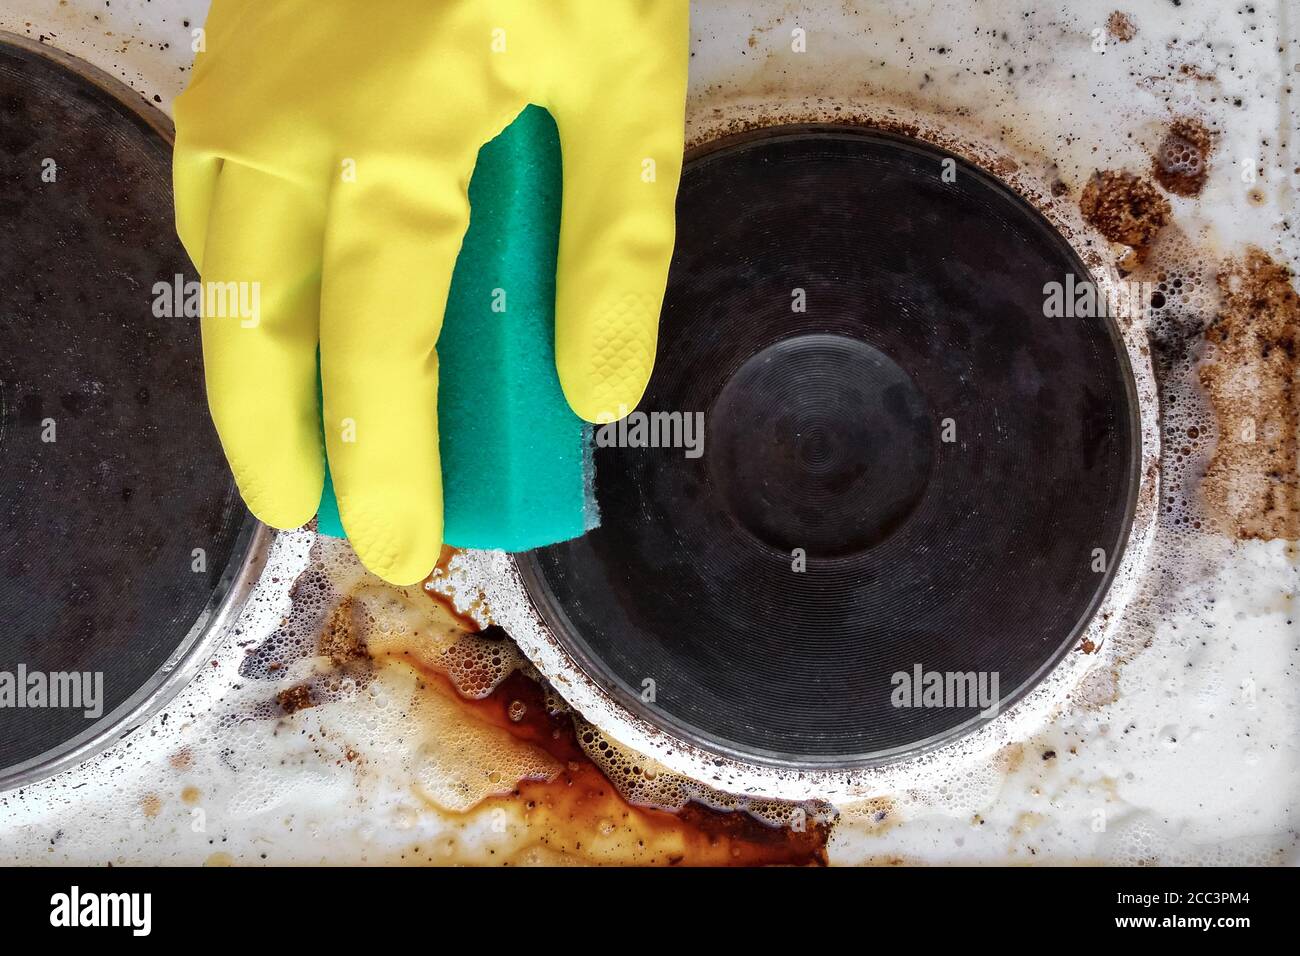 hand in household glove cleaning grease and dirt from kitchen stove Stock Photo